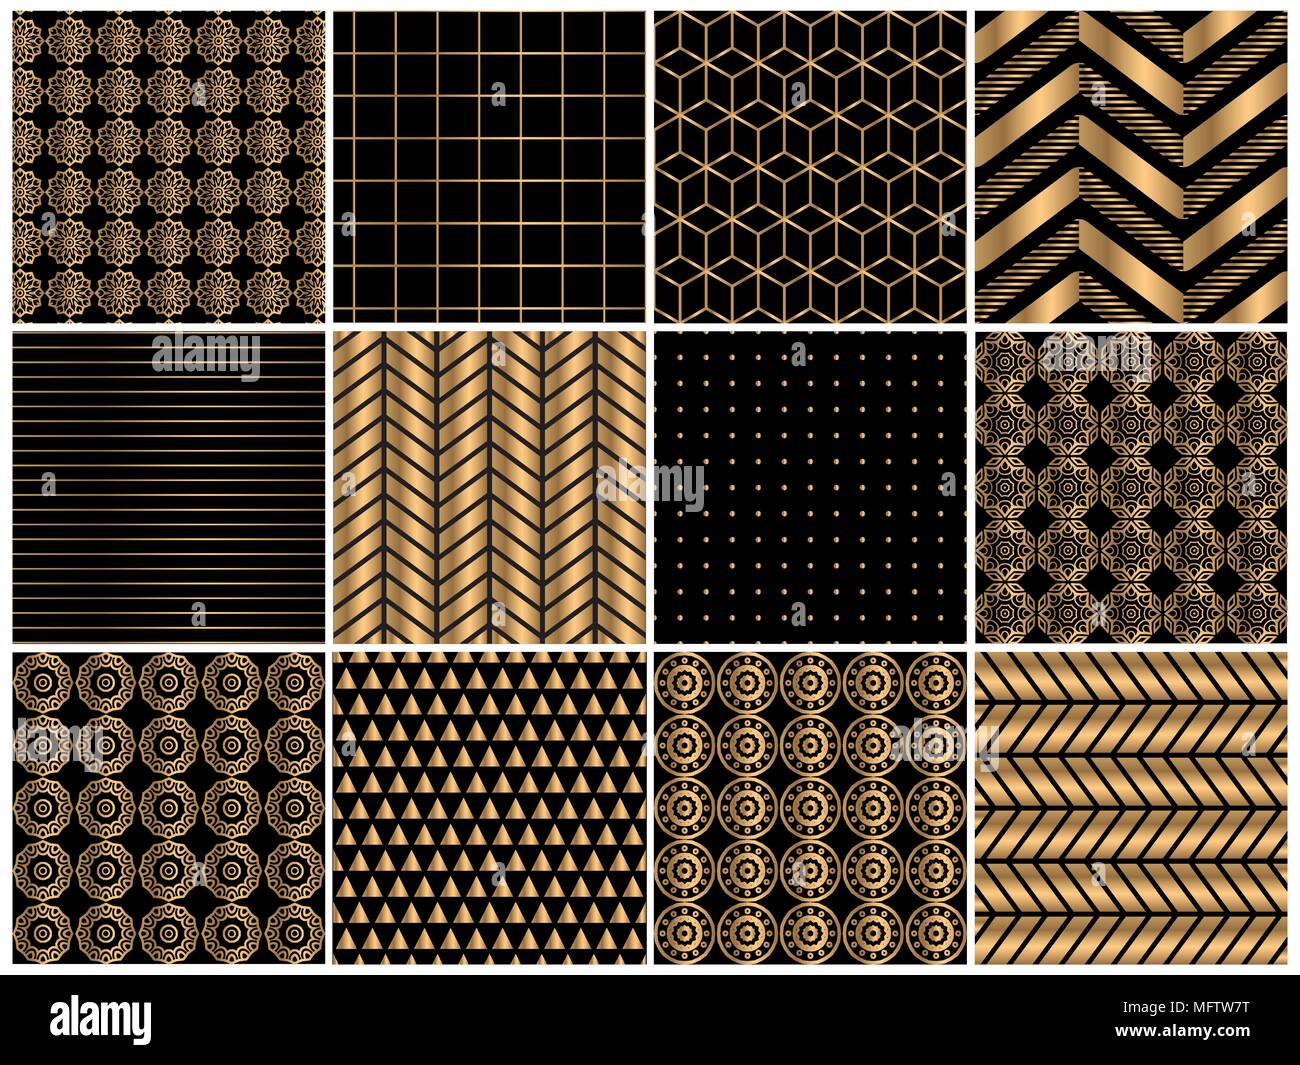 Gold color creative pattern design collection Stock Vector